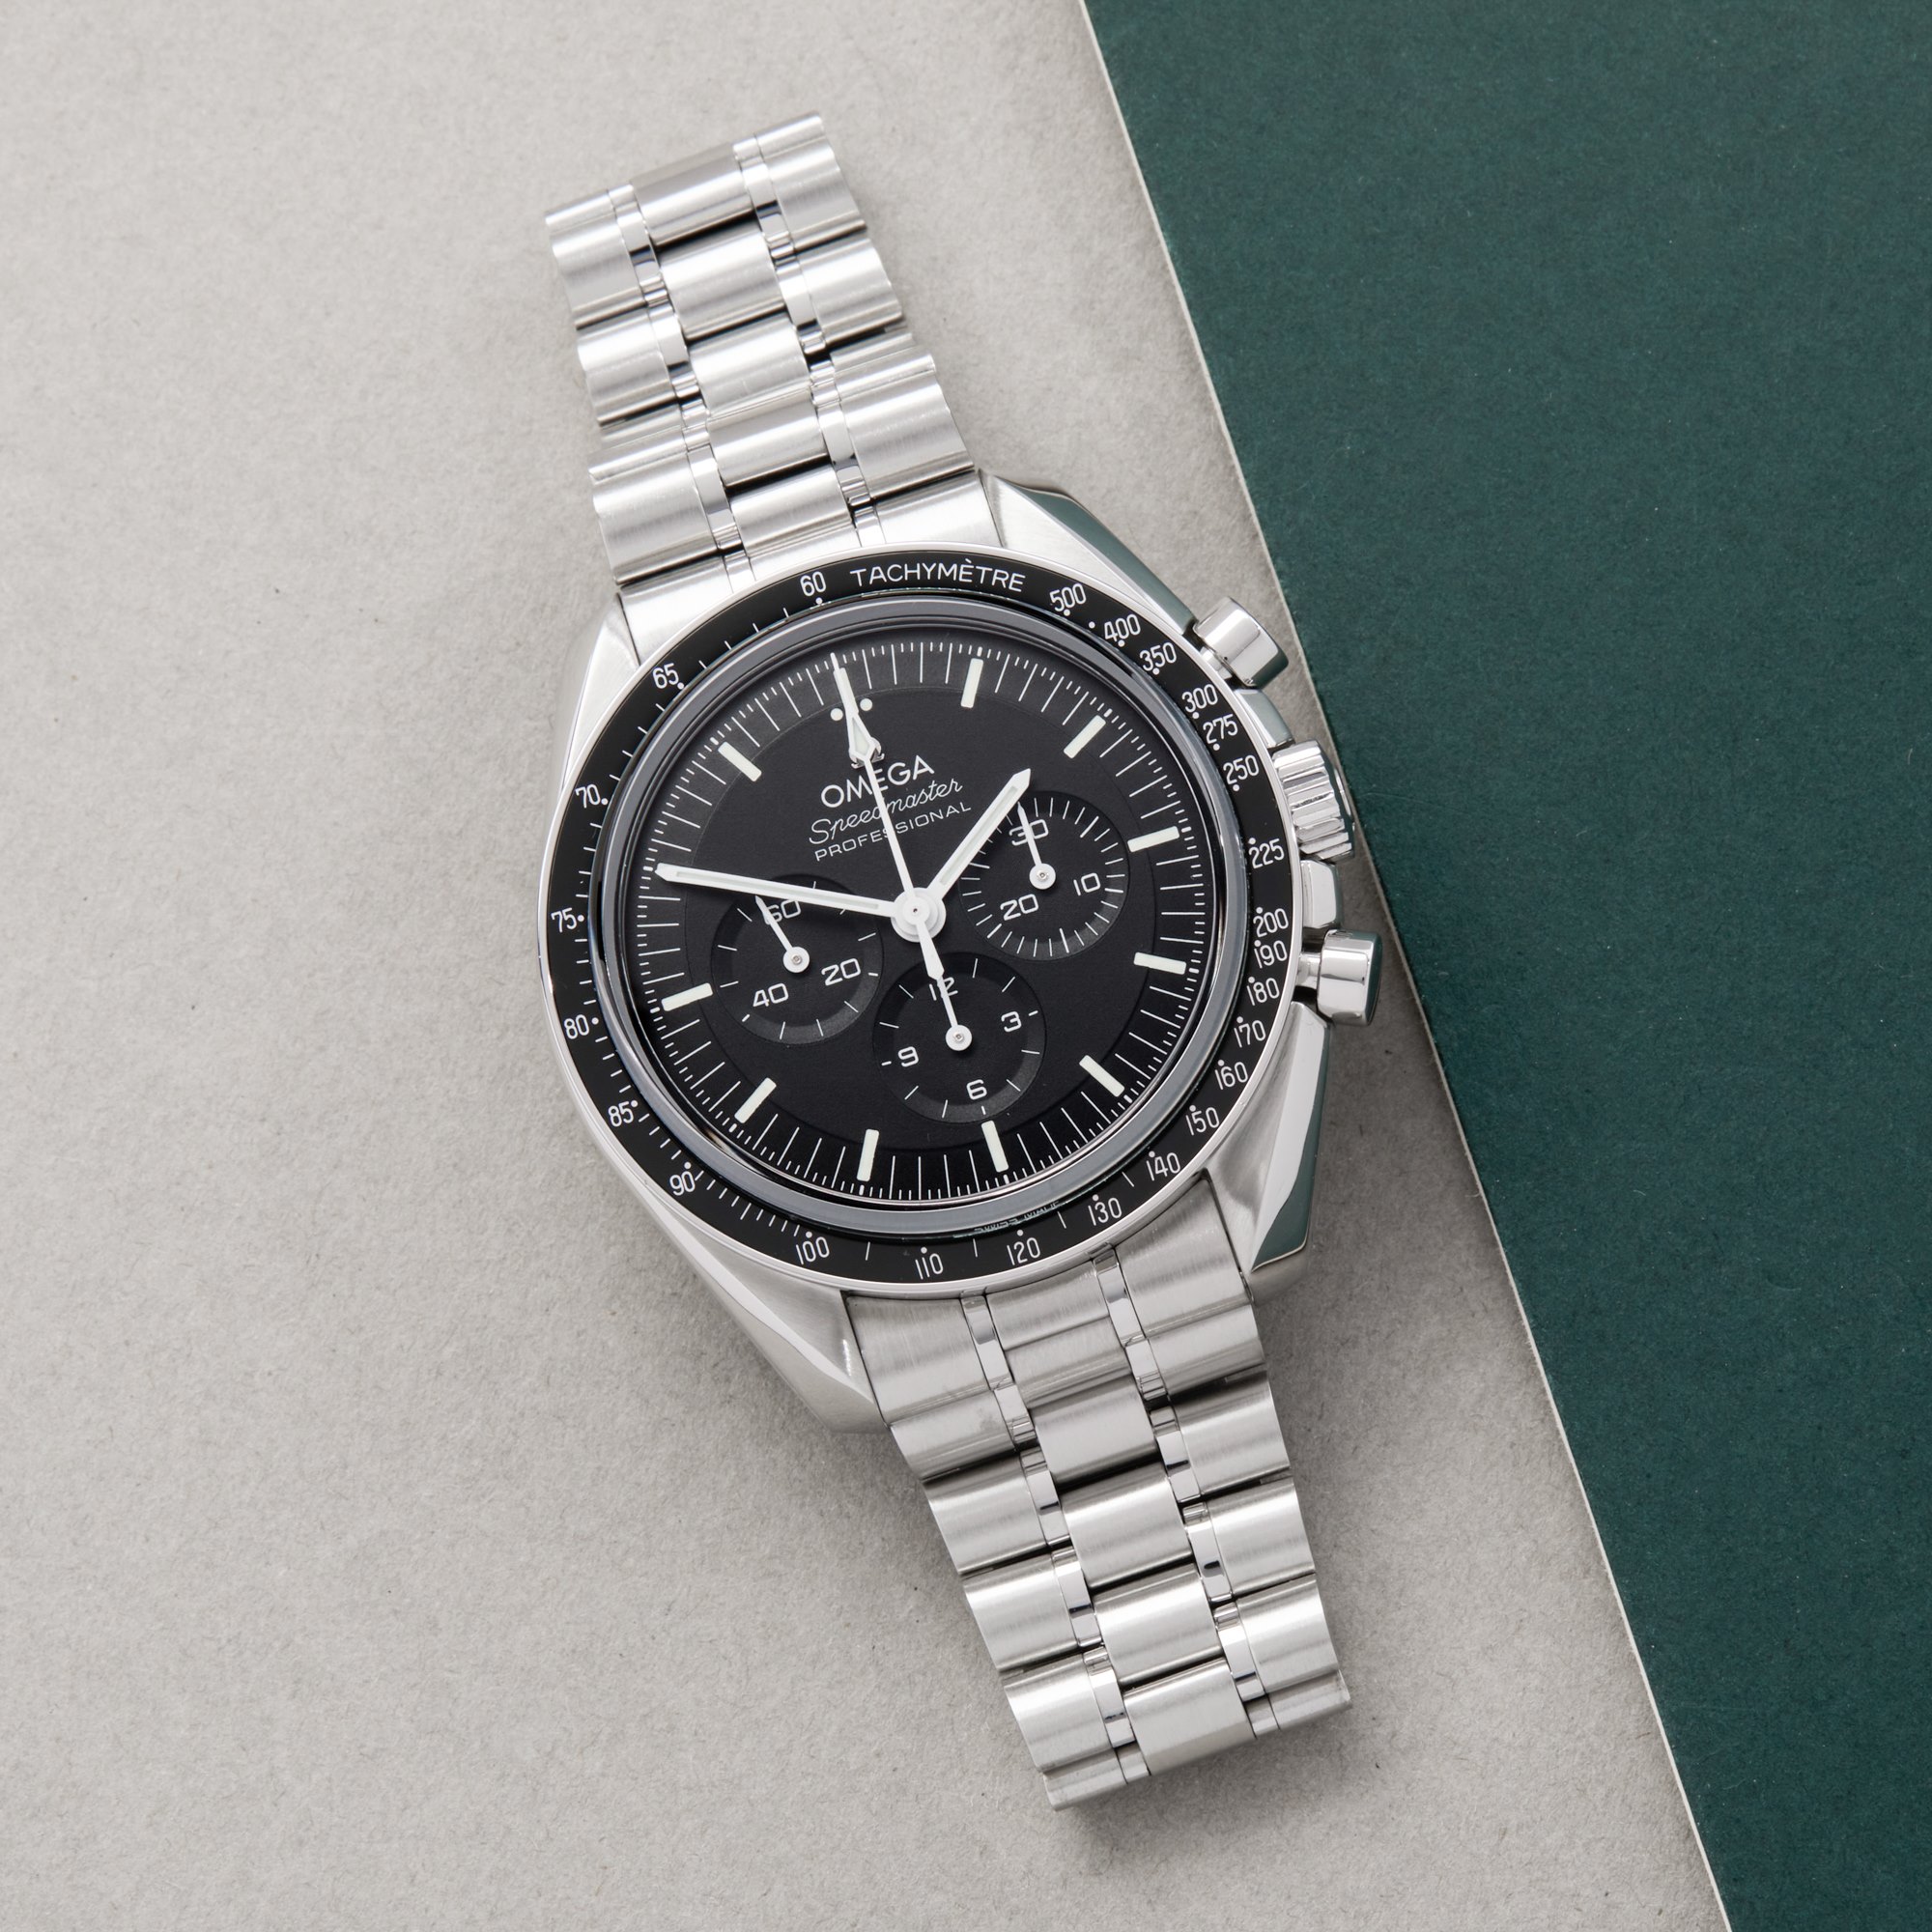 Omega Speedmaster Moonwatch Co-Axial Chronograph Roestvrij Staal 310.30.42.50.01.002